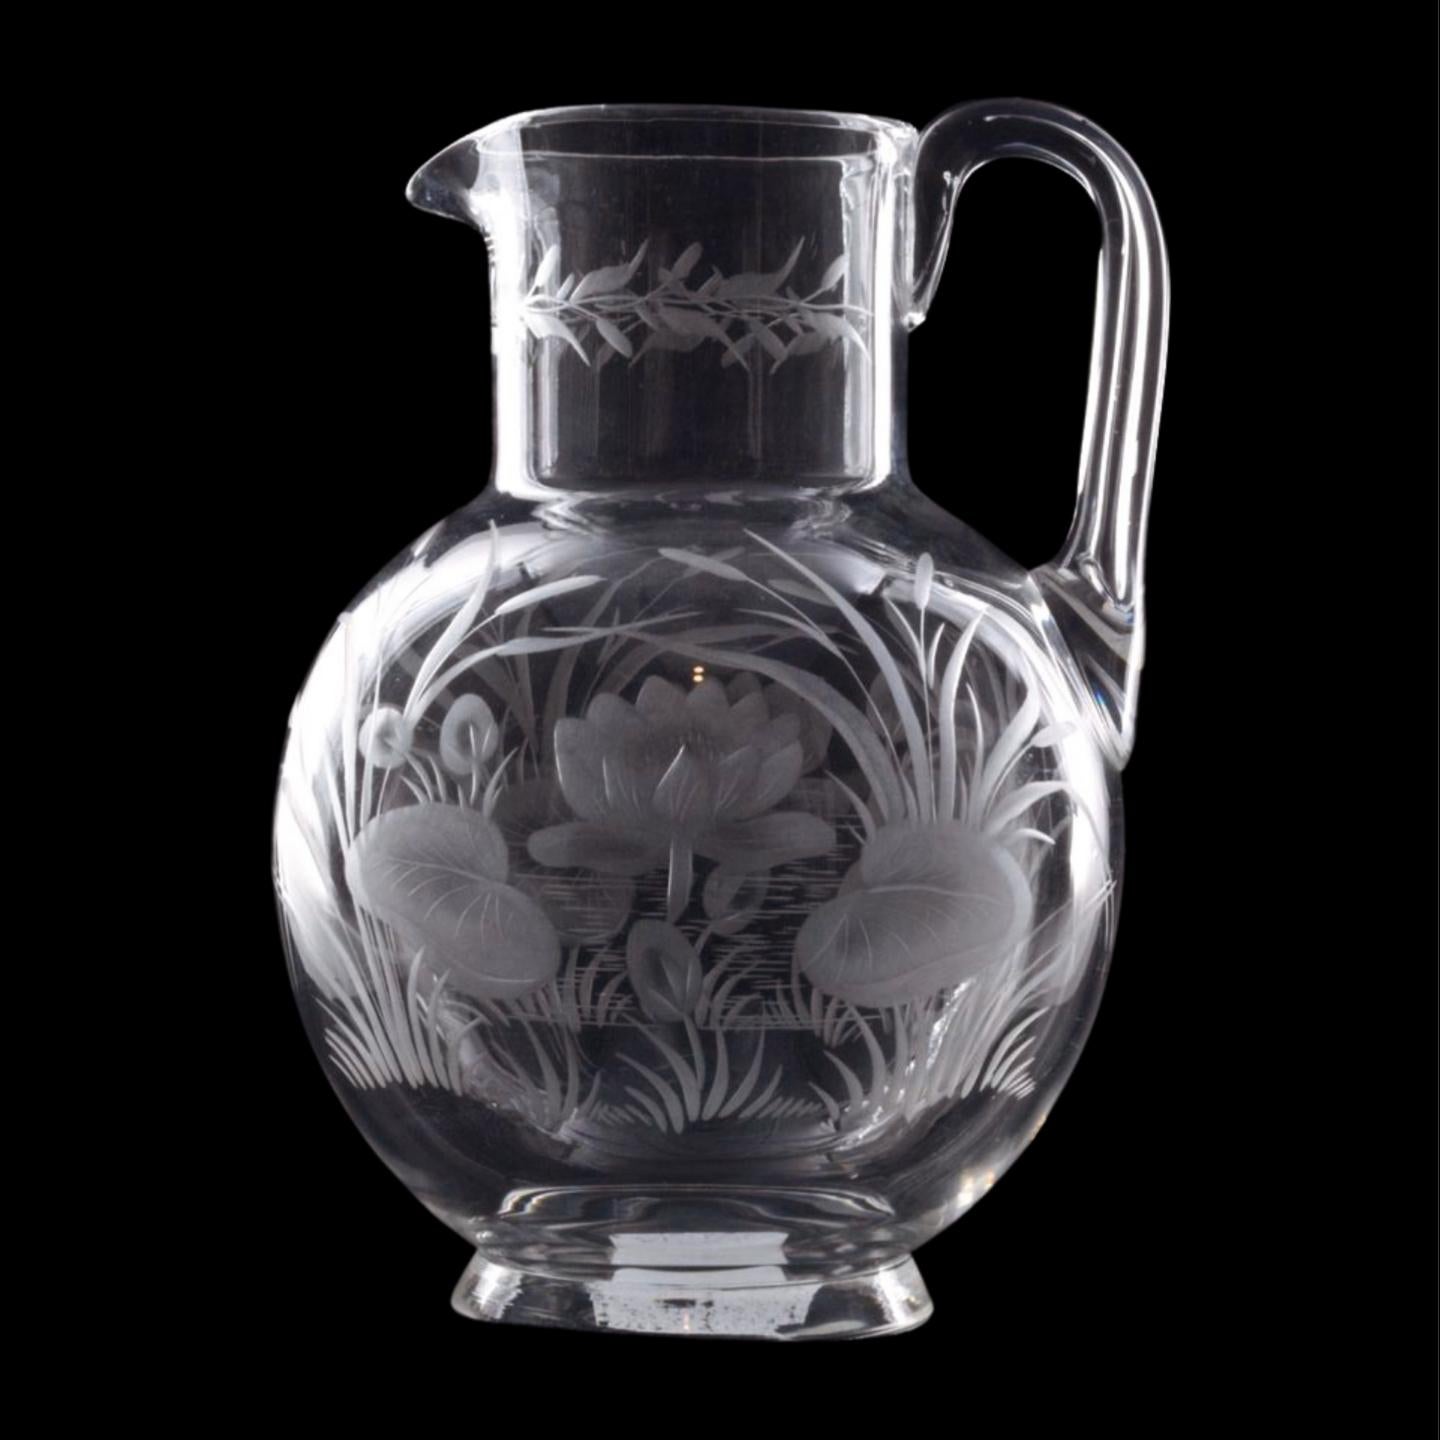 A lovely water jug with spherical body, suitably etched and engraved with water lillies and other aquatic plants.

Stourbridge glass refers to glassware produced in the town of Stourbridge, located in the West Midlands region of England. Stourbridge